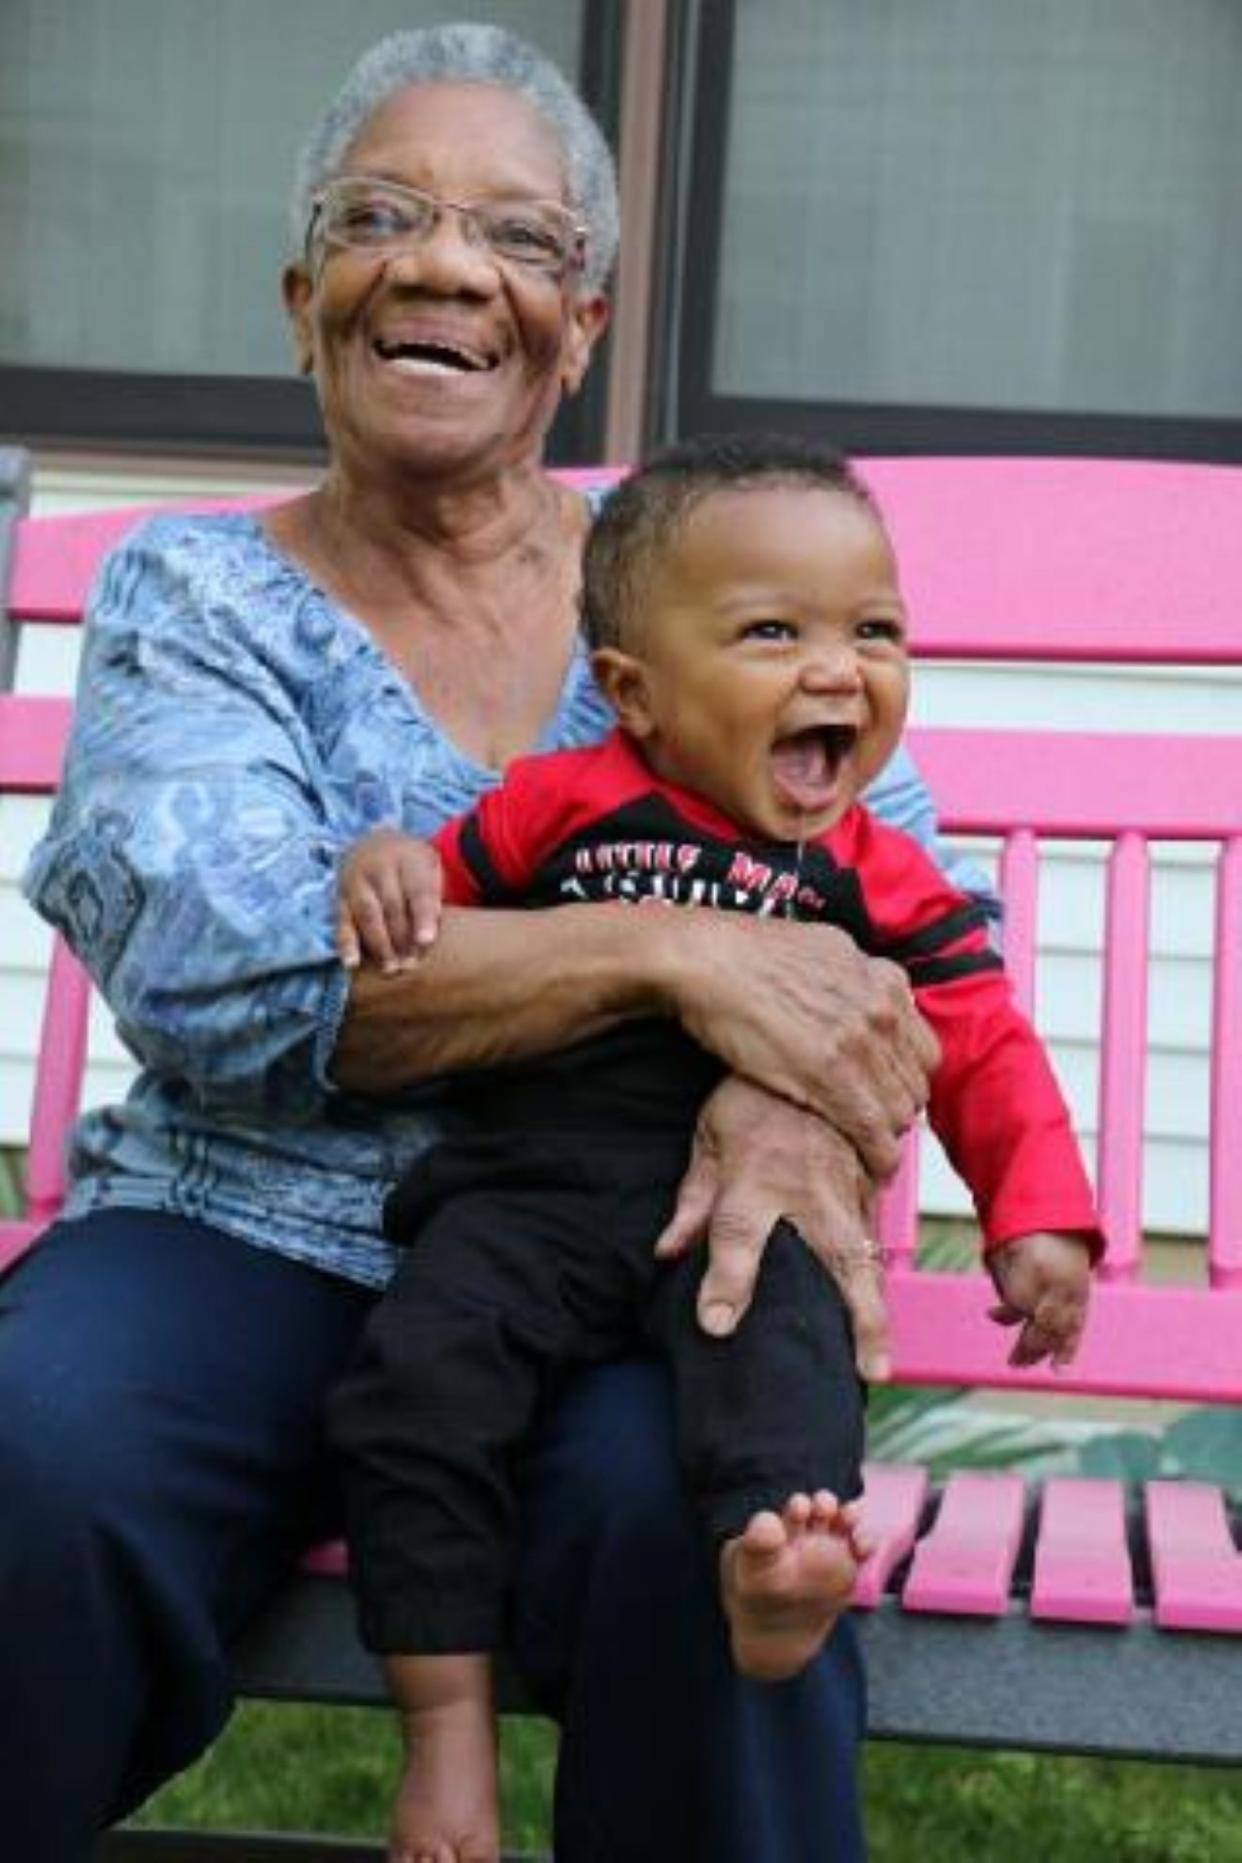 Cordelia Taylor, founder of Family House, a residential facility for seniors to live with dignity and respect, is shown with her grandson Isaiah Jackson.